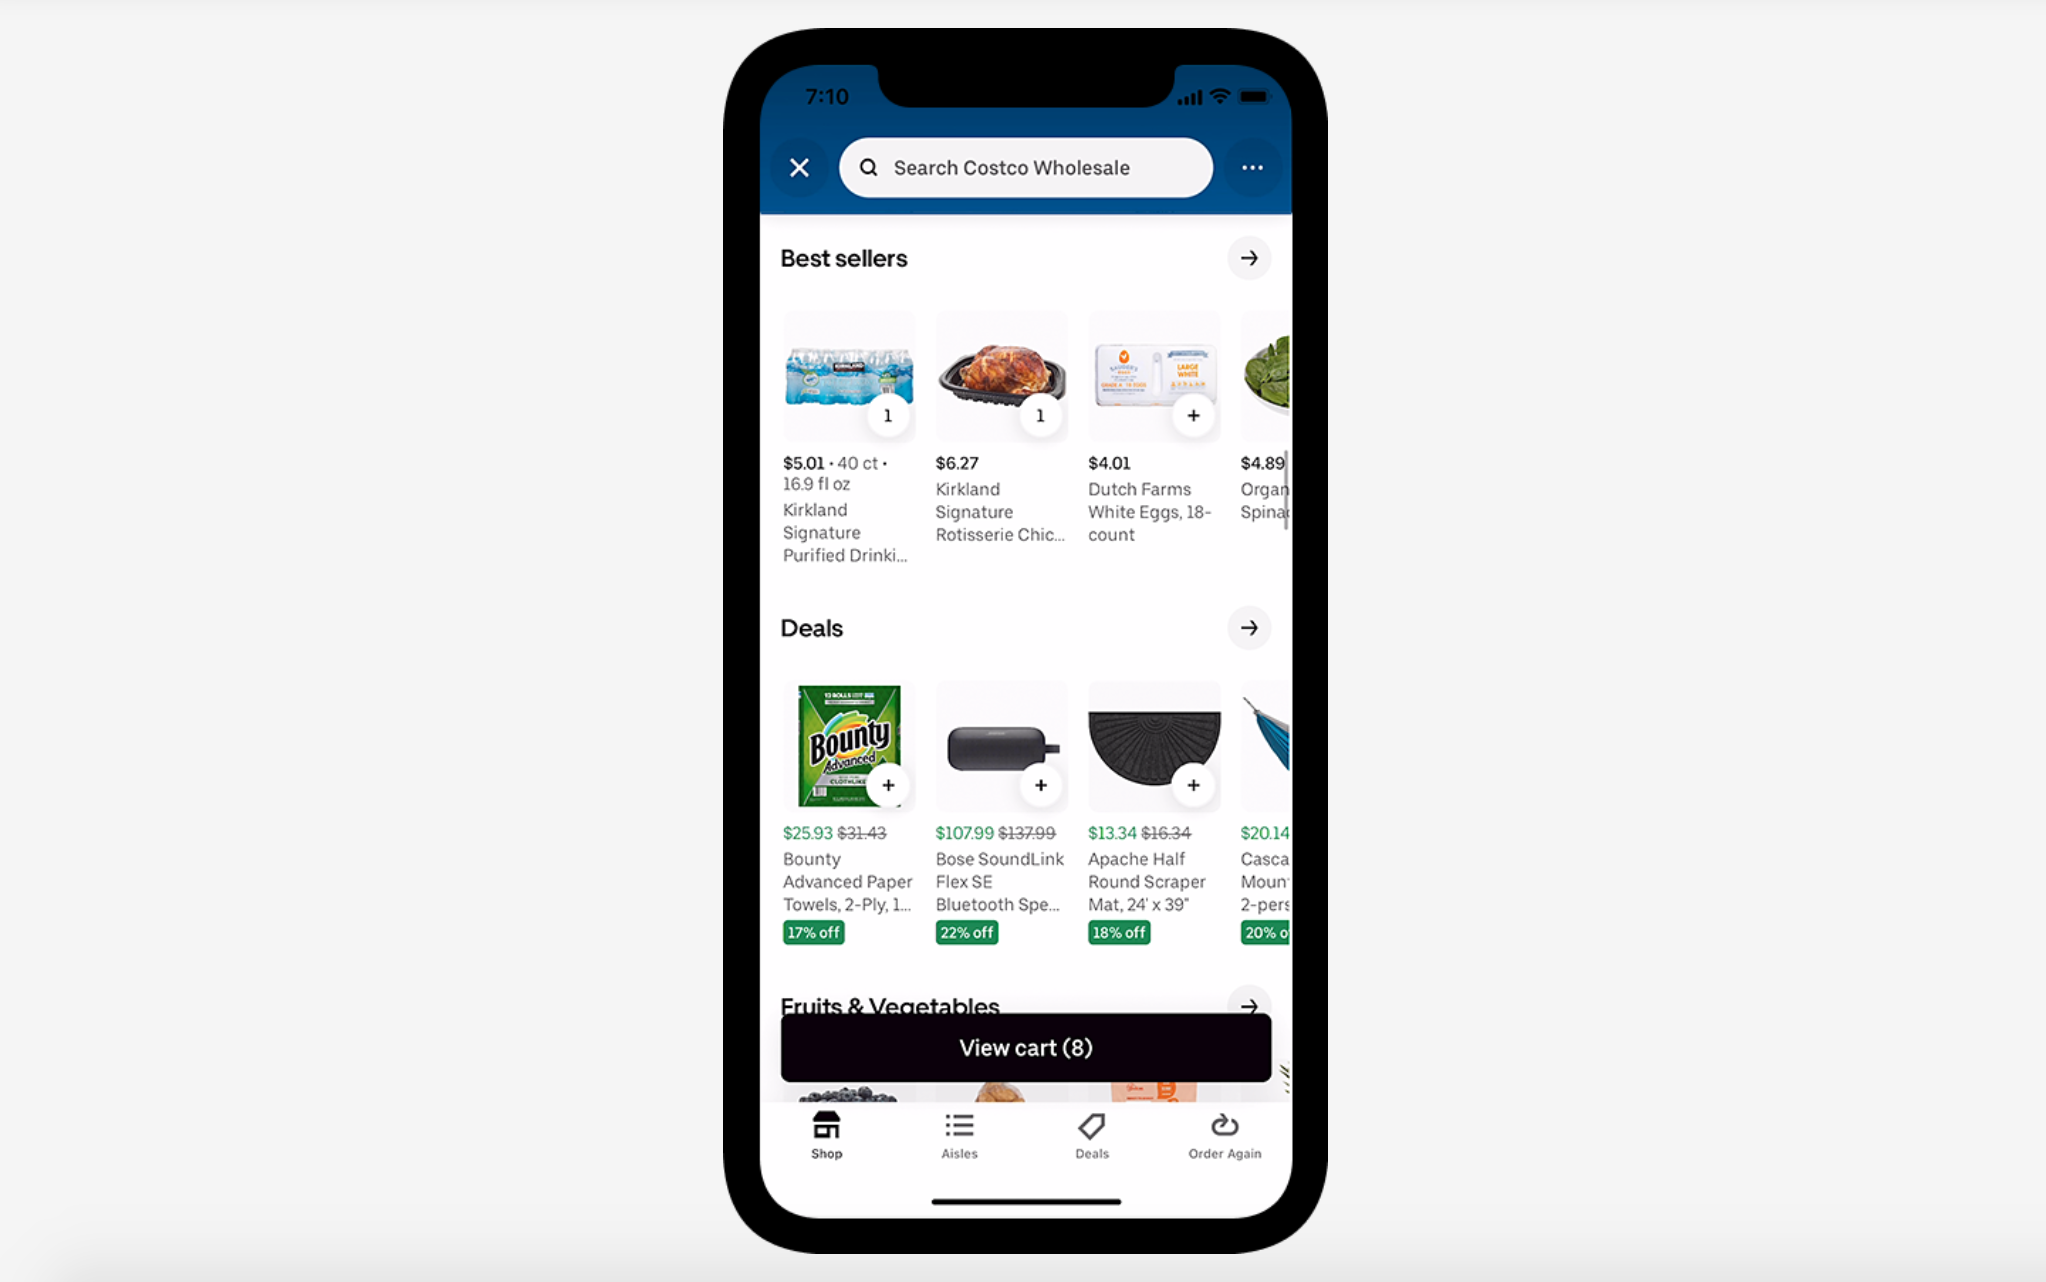 The app being used to order Costco.